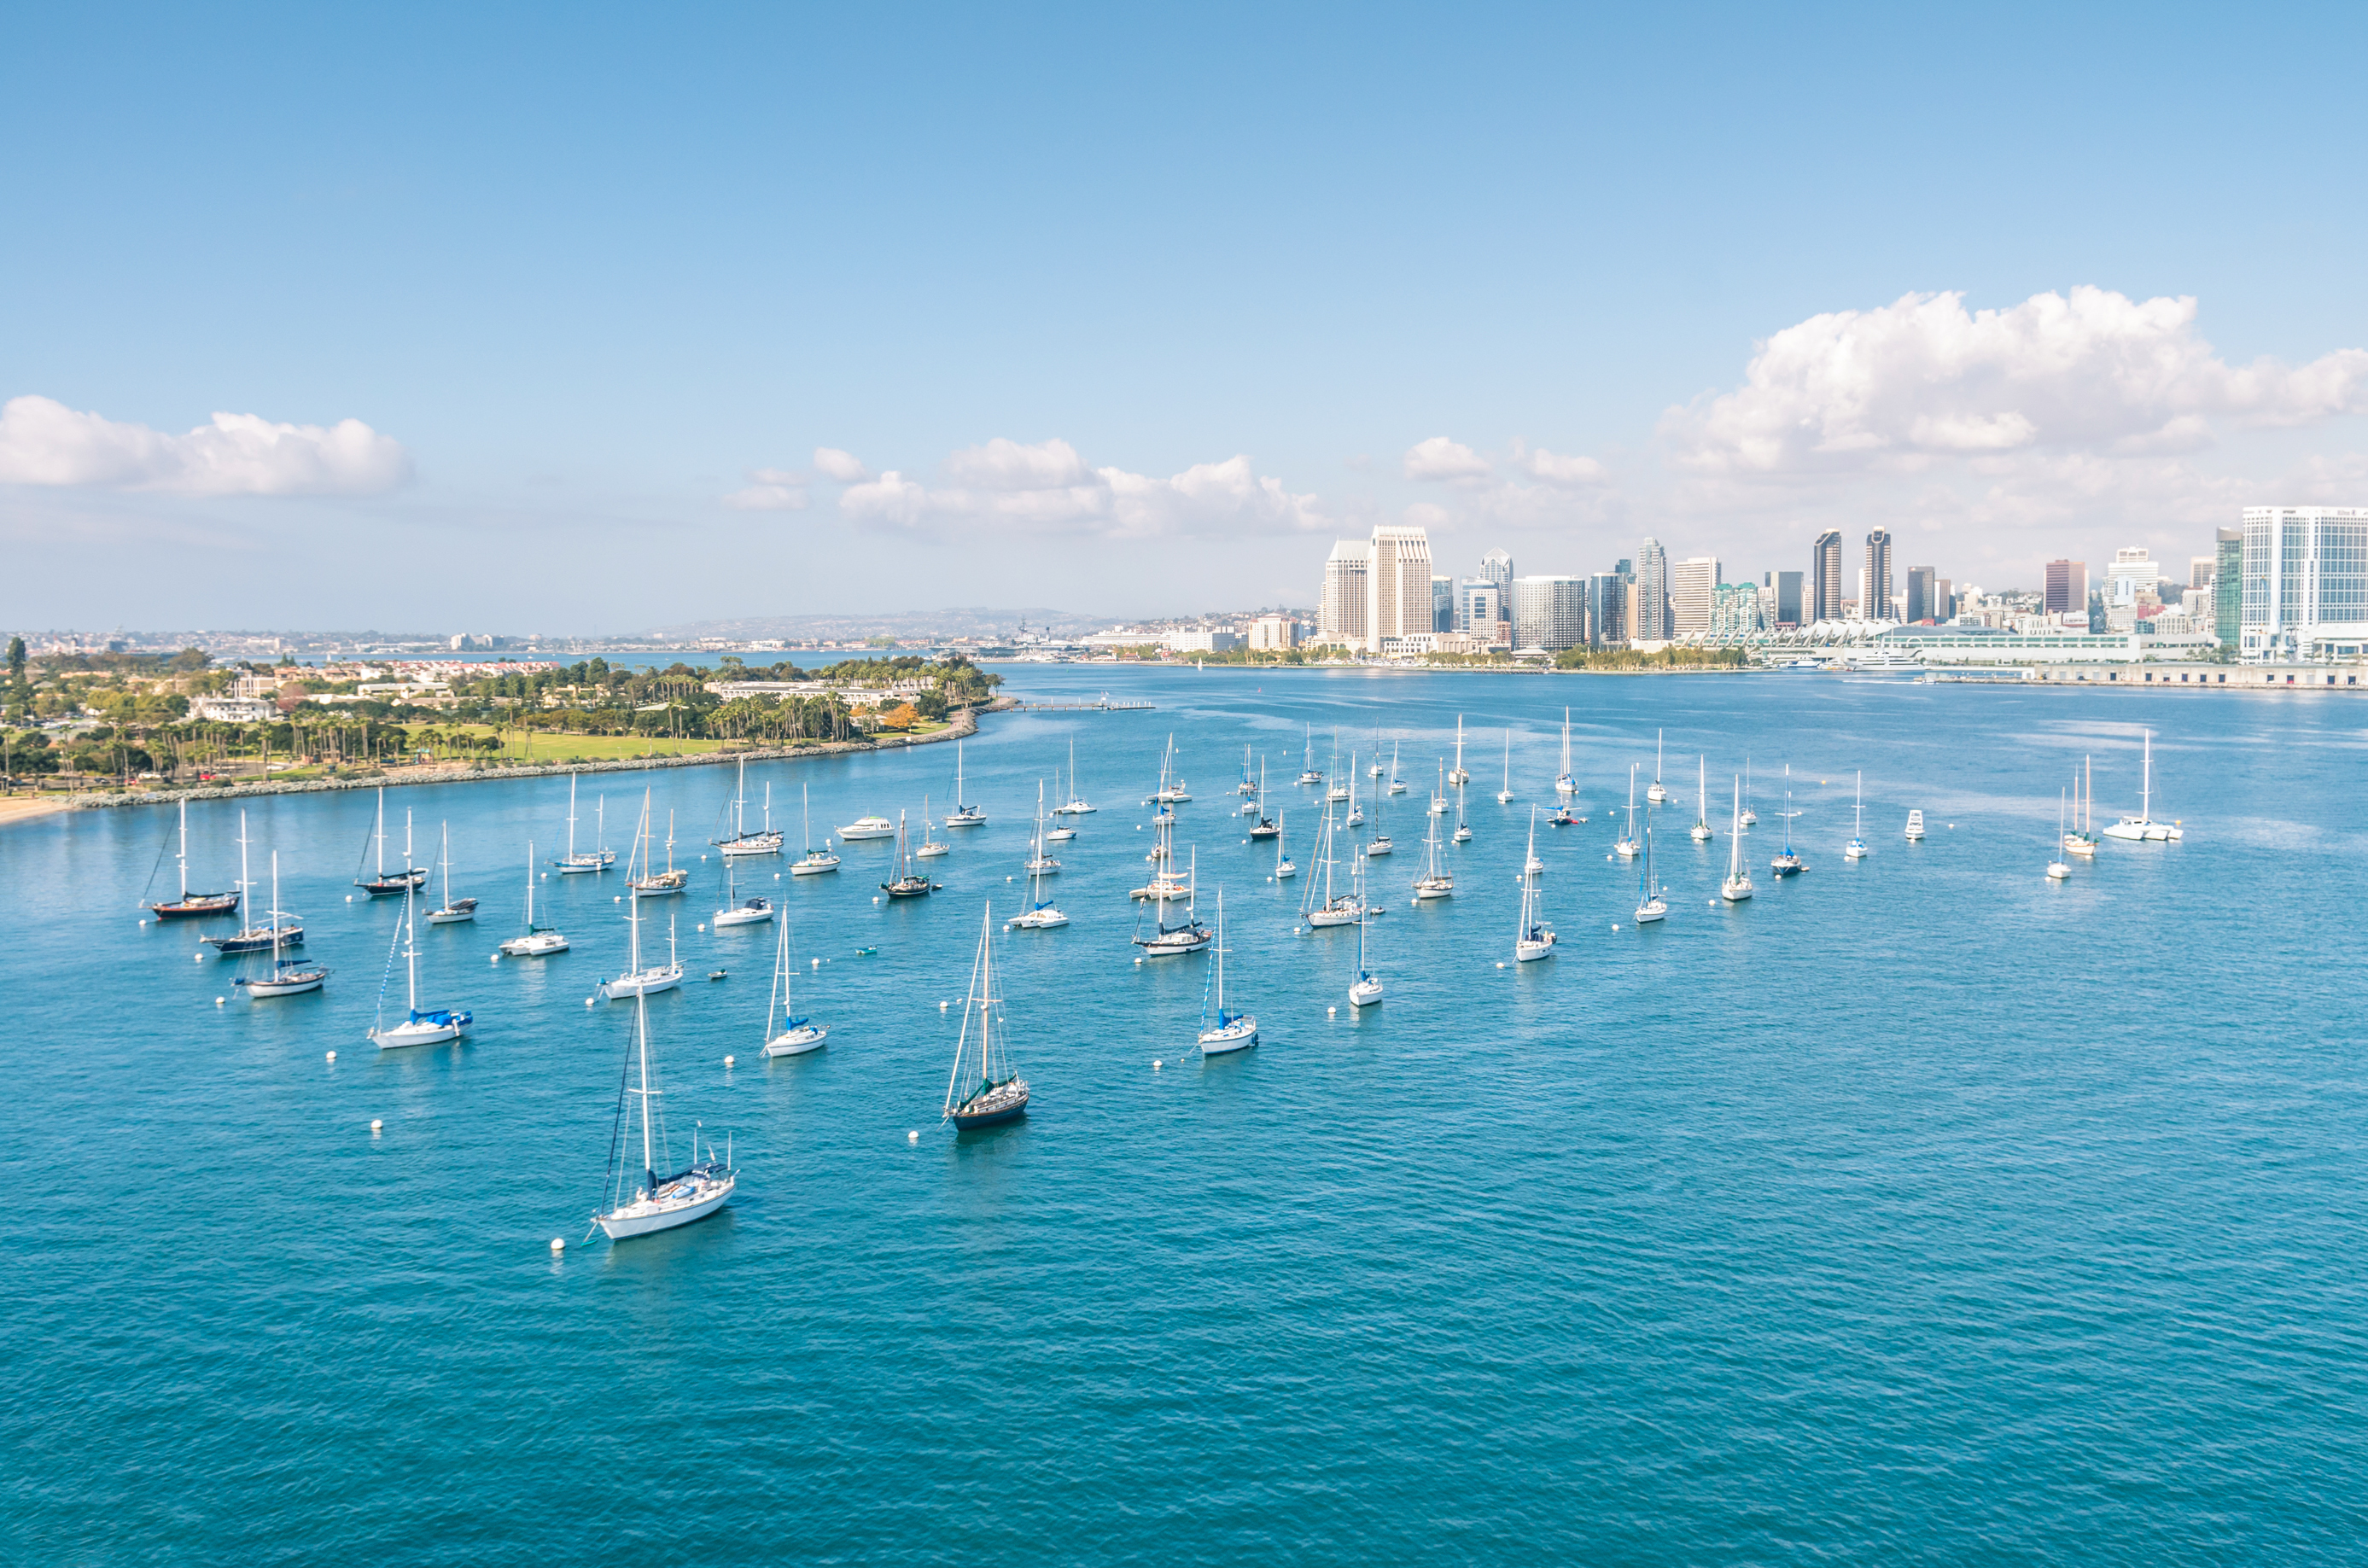 San Diego skyline and waterfront with sailing boats